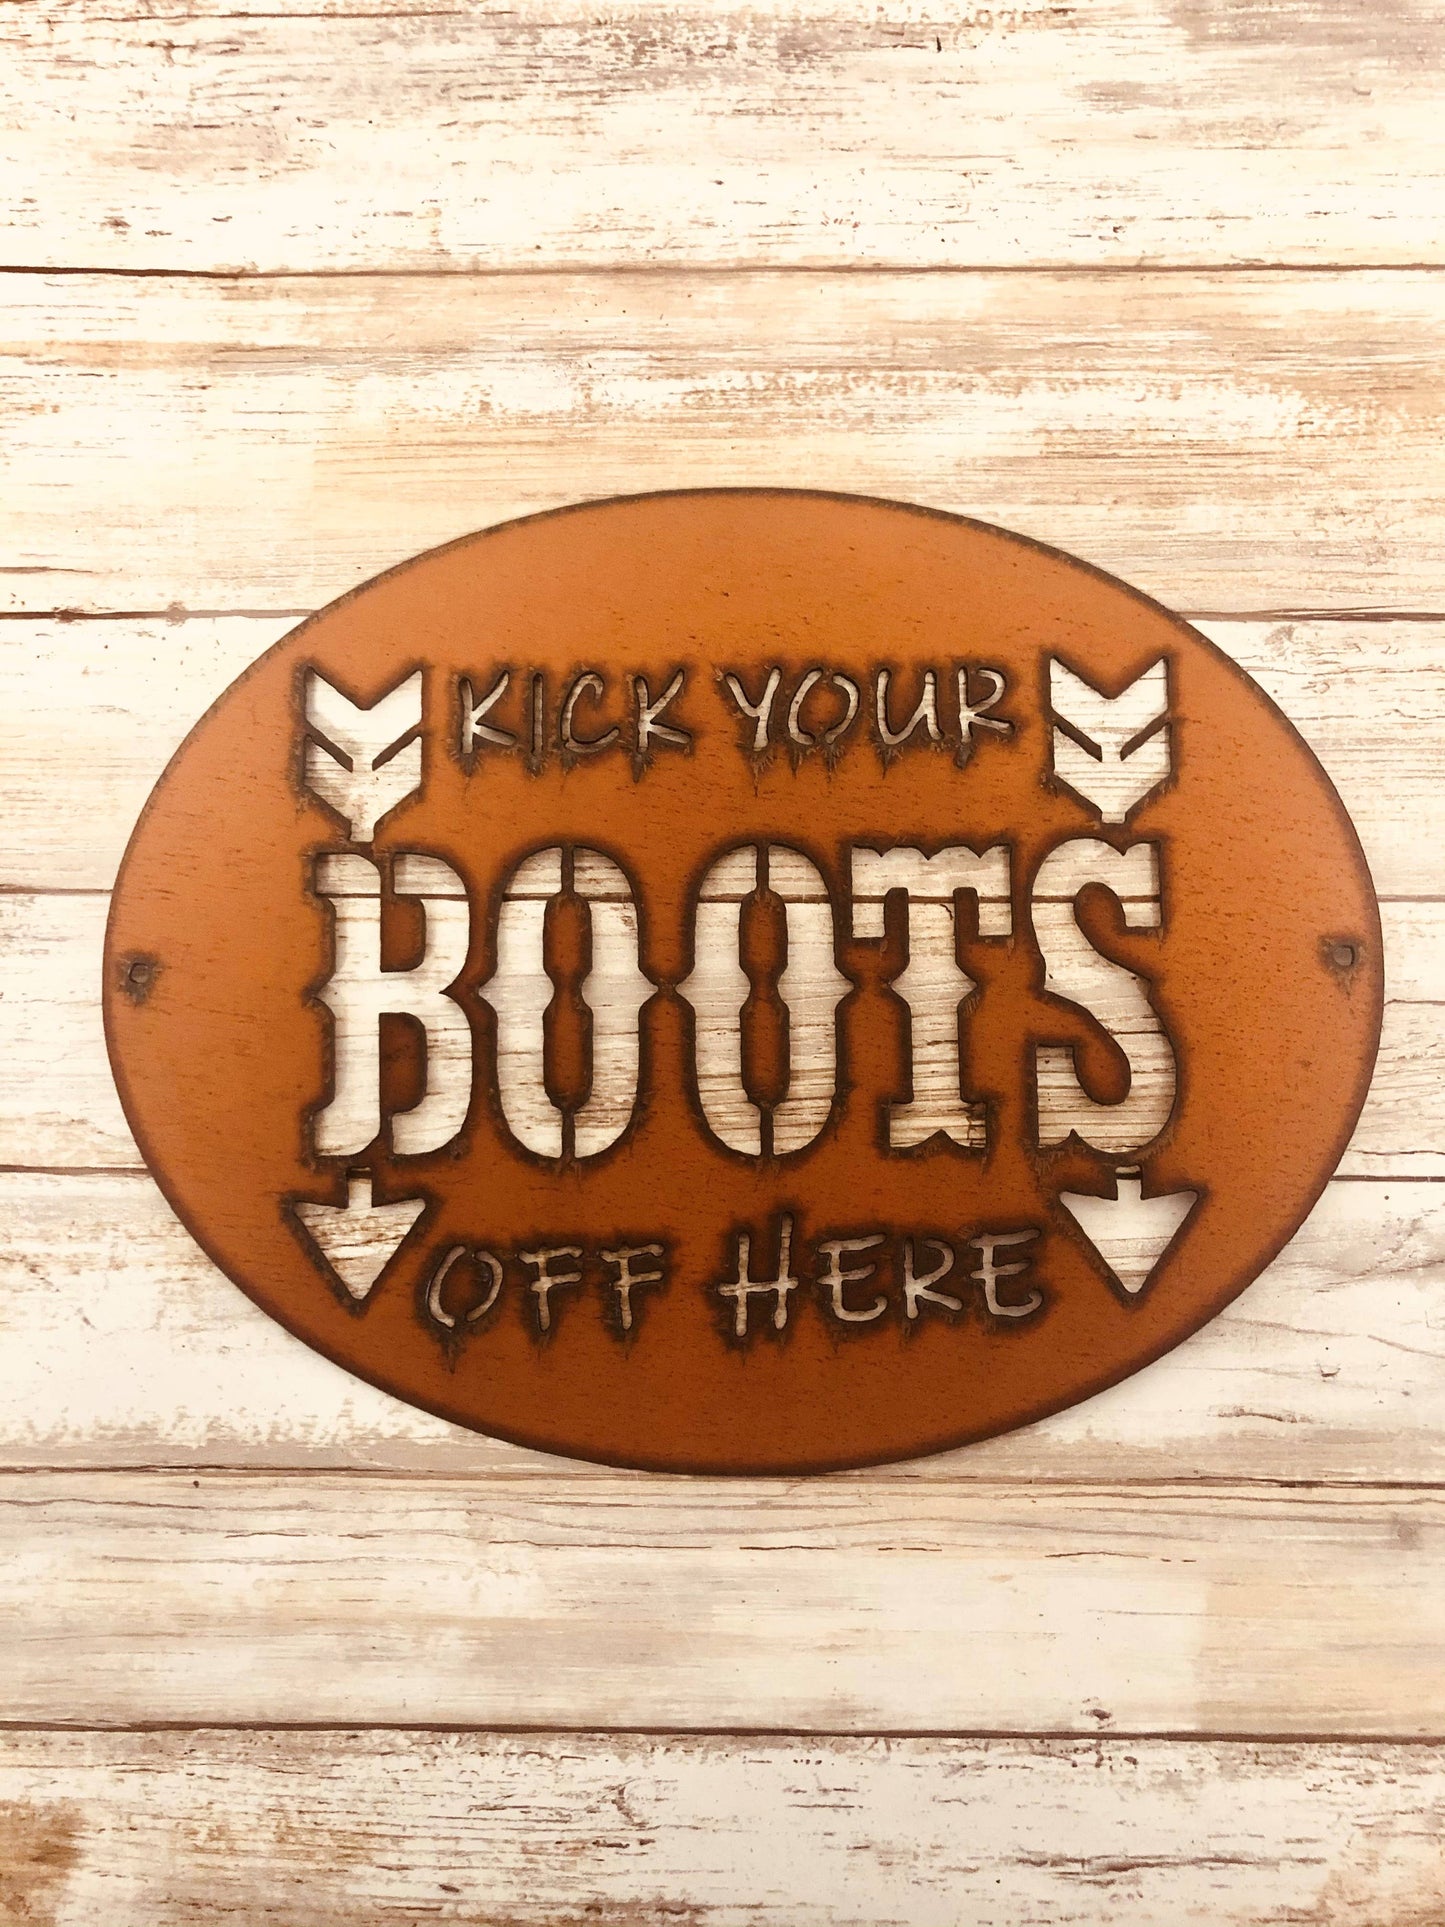 Kick off your Boots Western Rustic Metal Sign